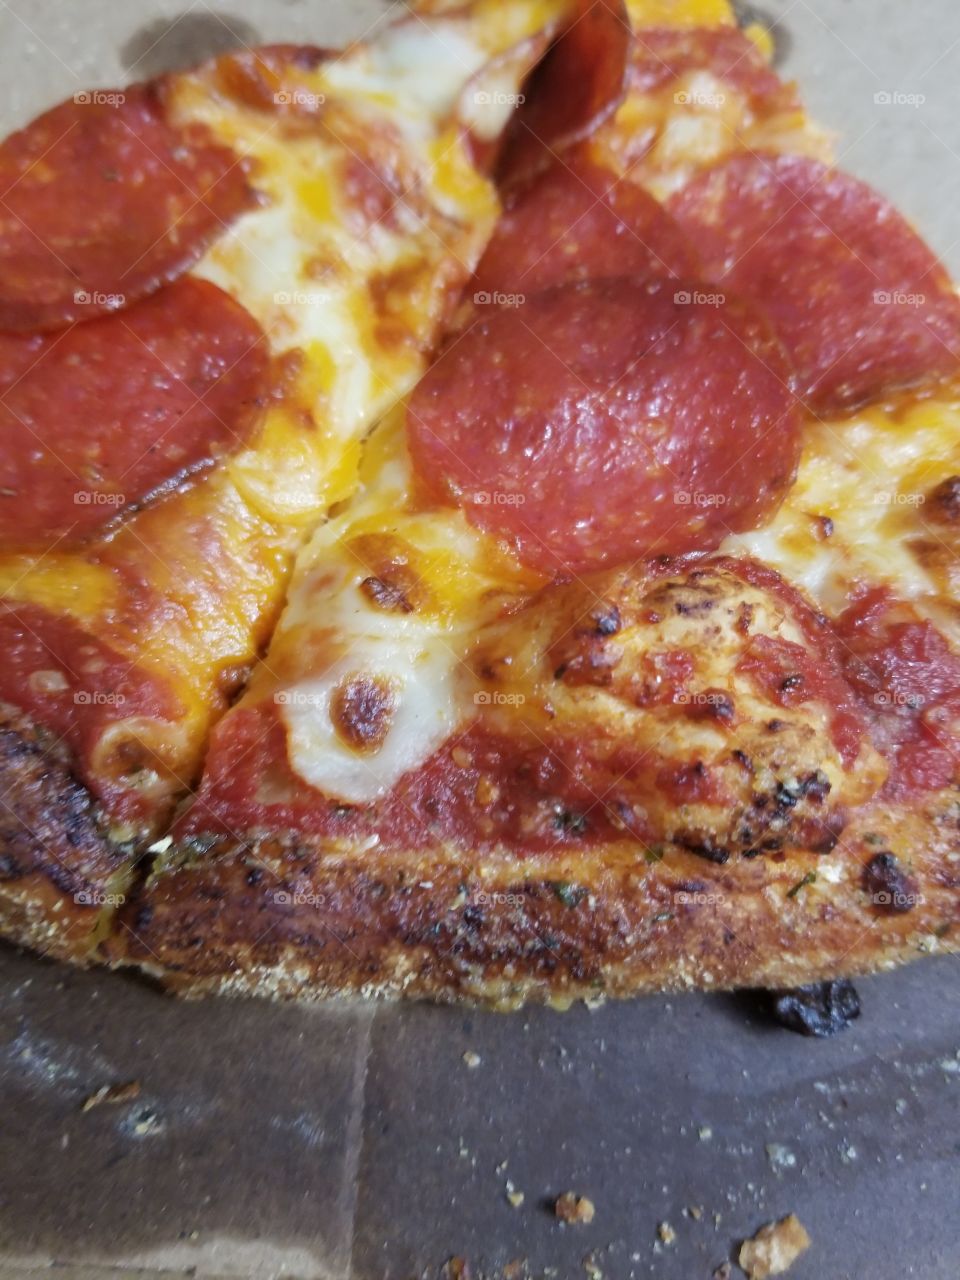 Two slices of pepperoni pizza